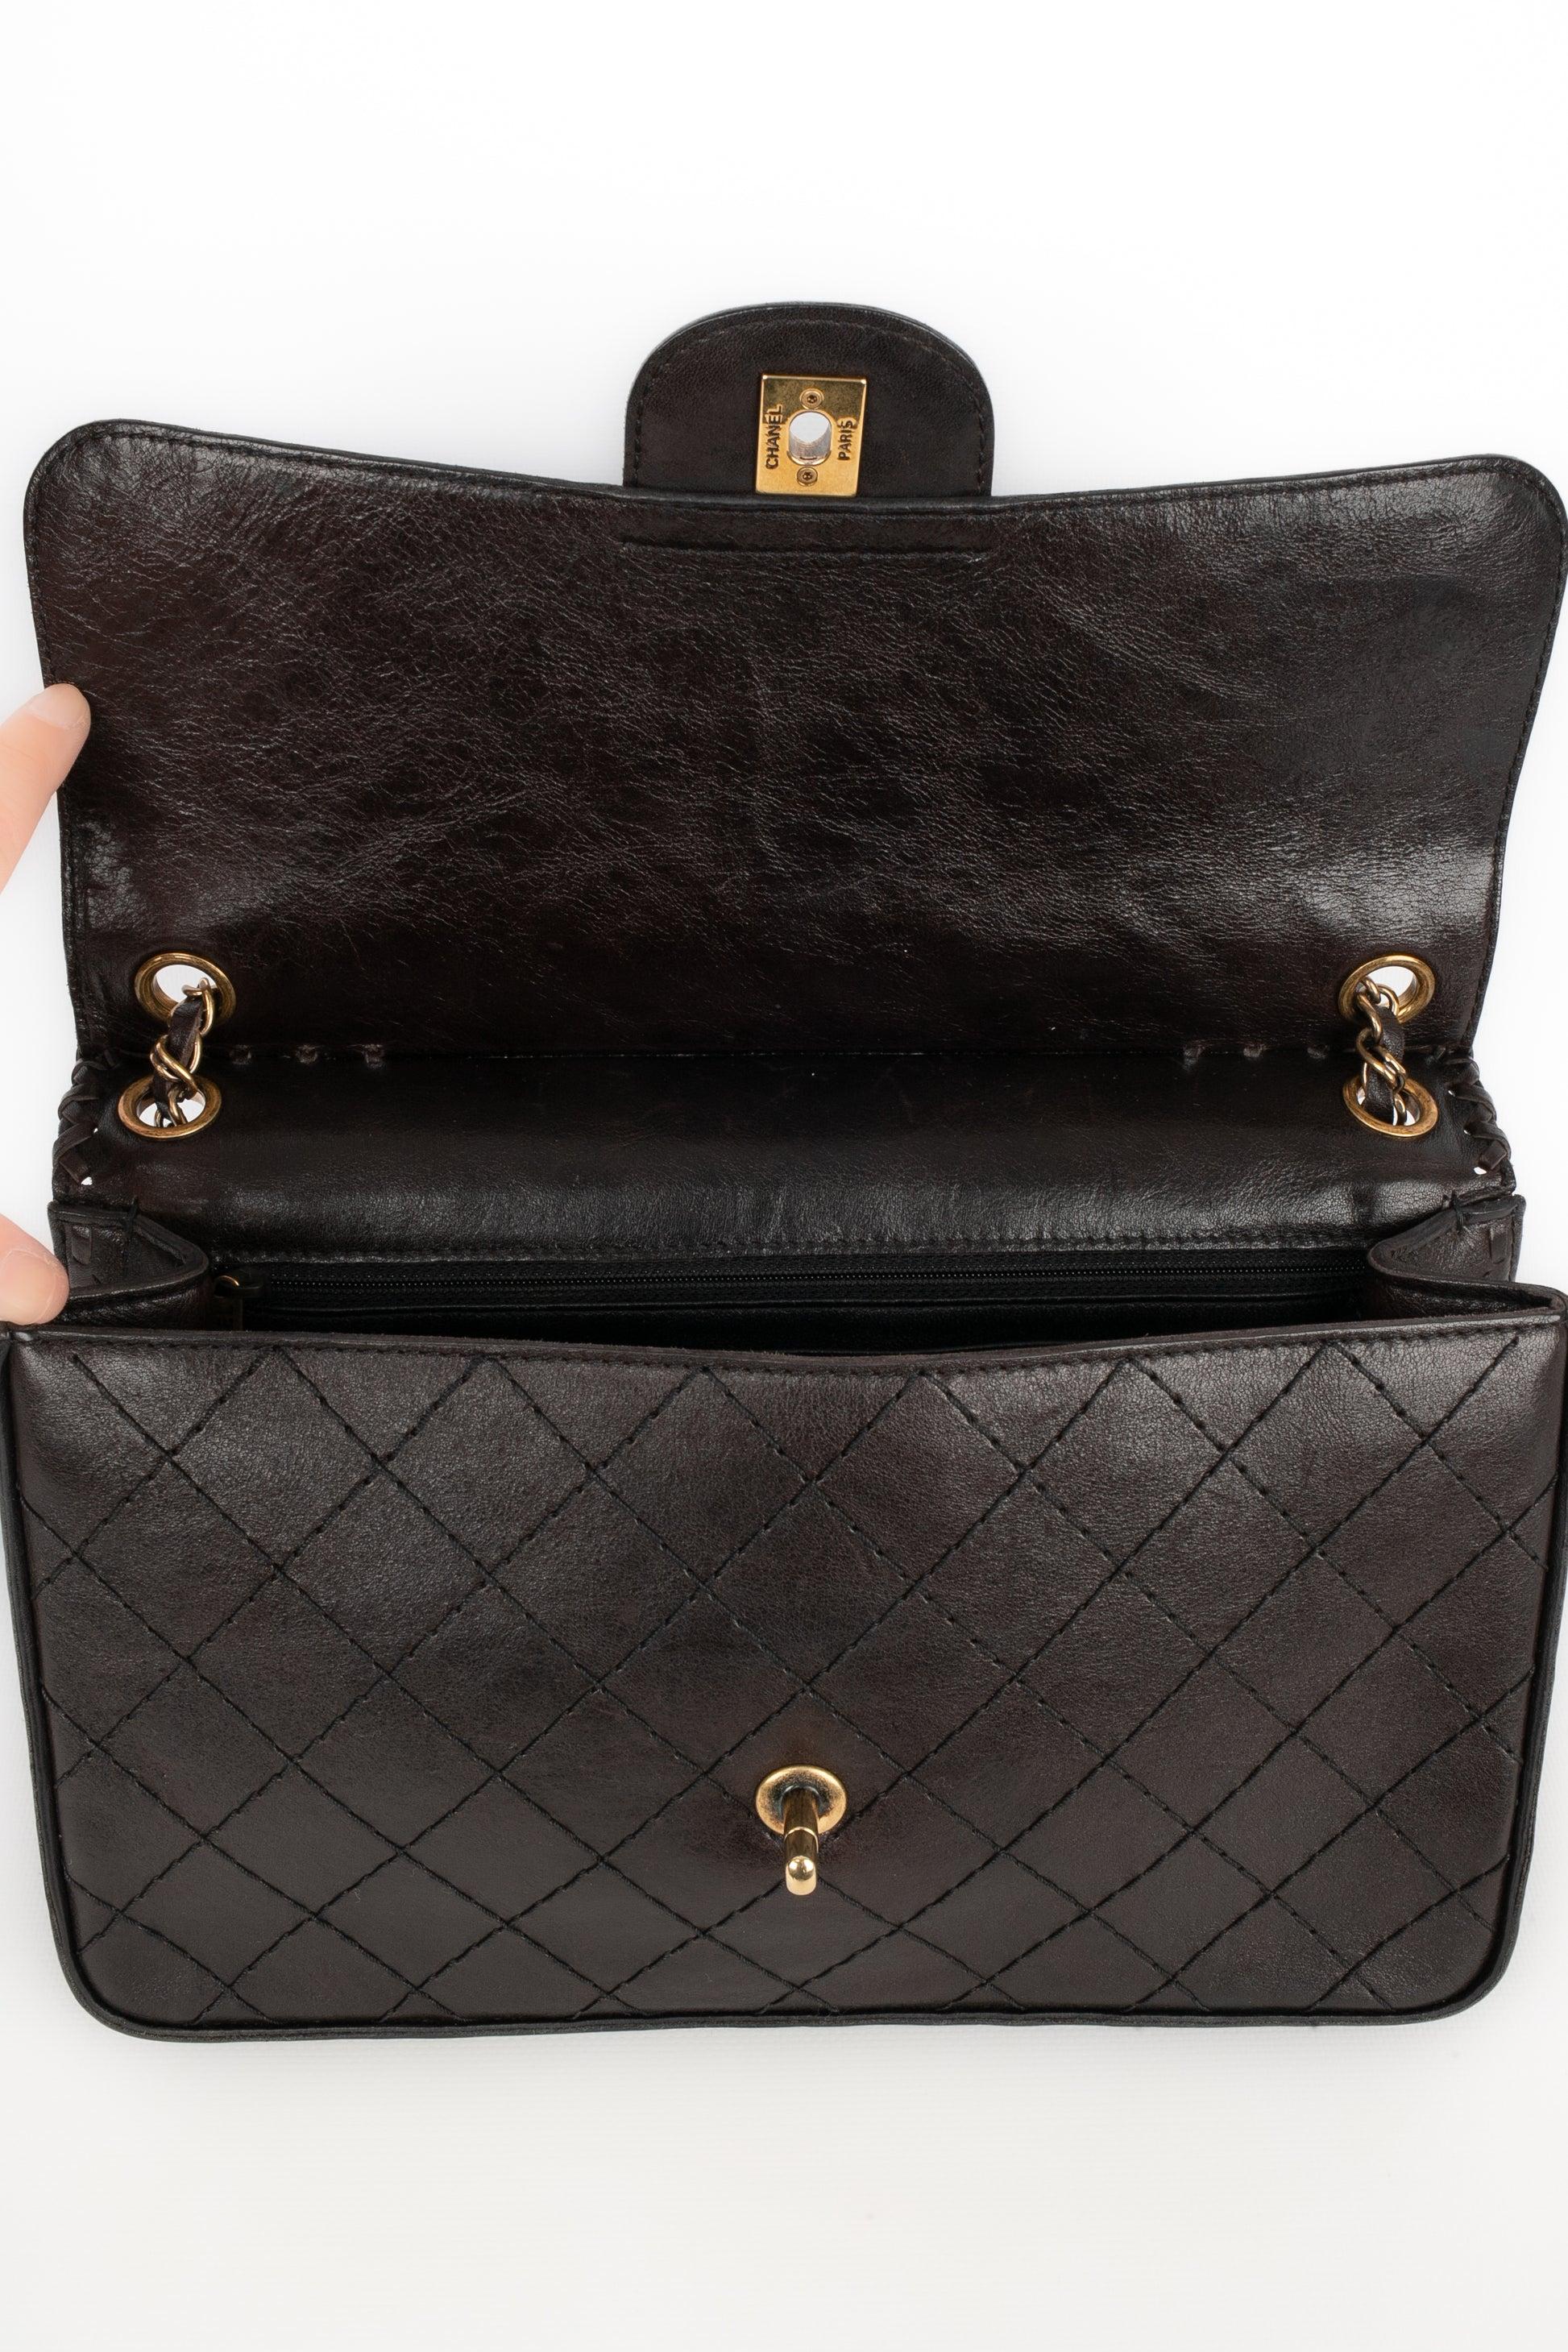 Chanel Timeless Quilted Leather Bag, 2013/2014 For Sale 4